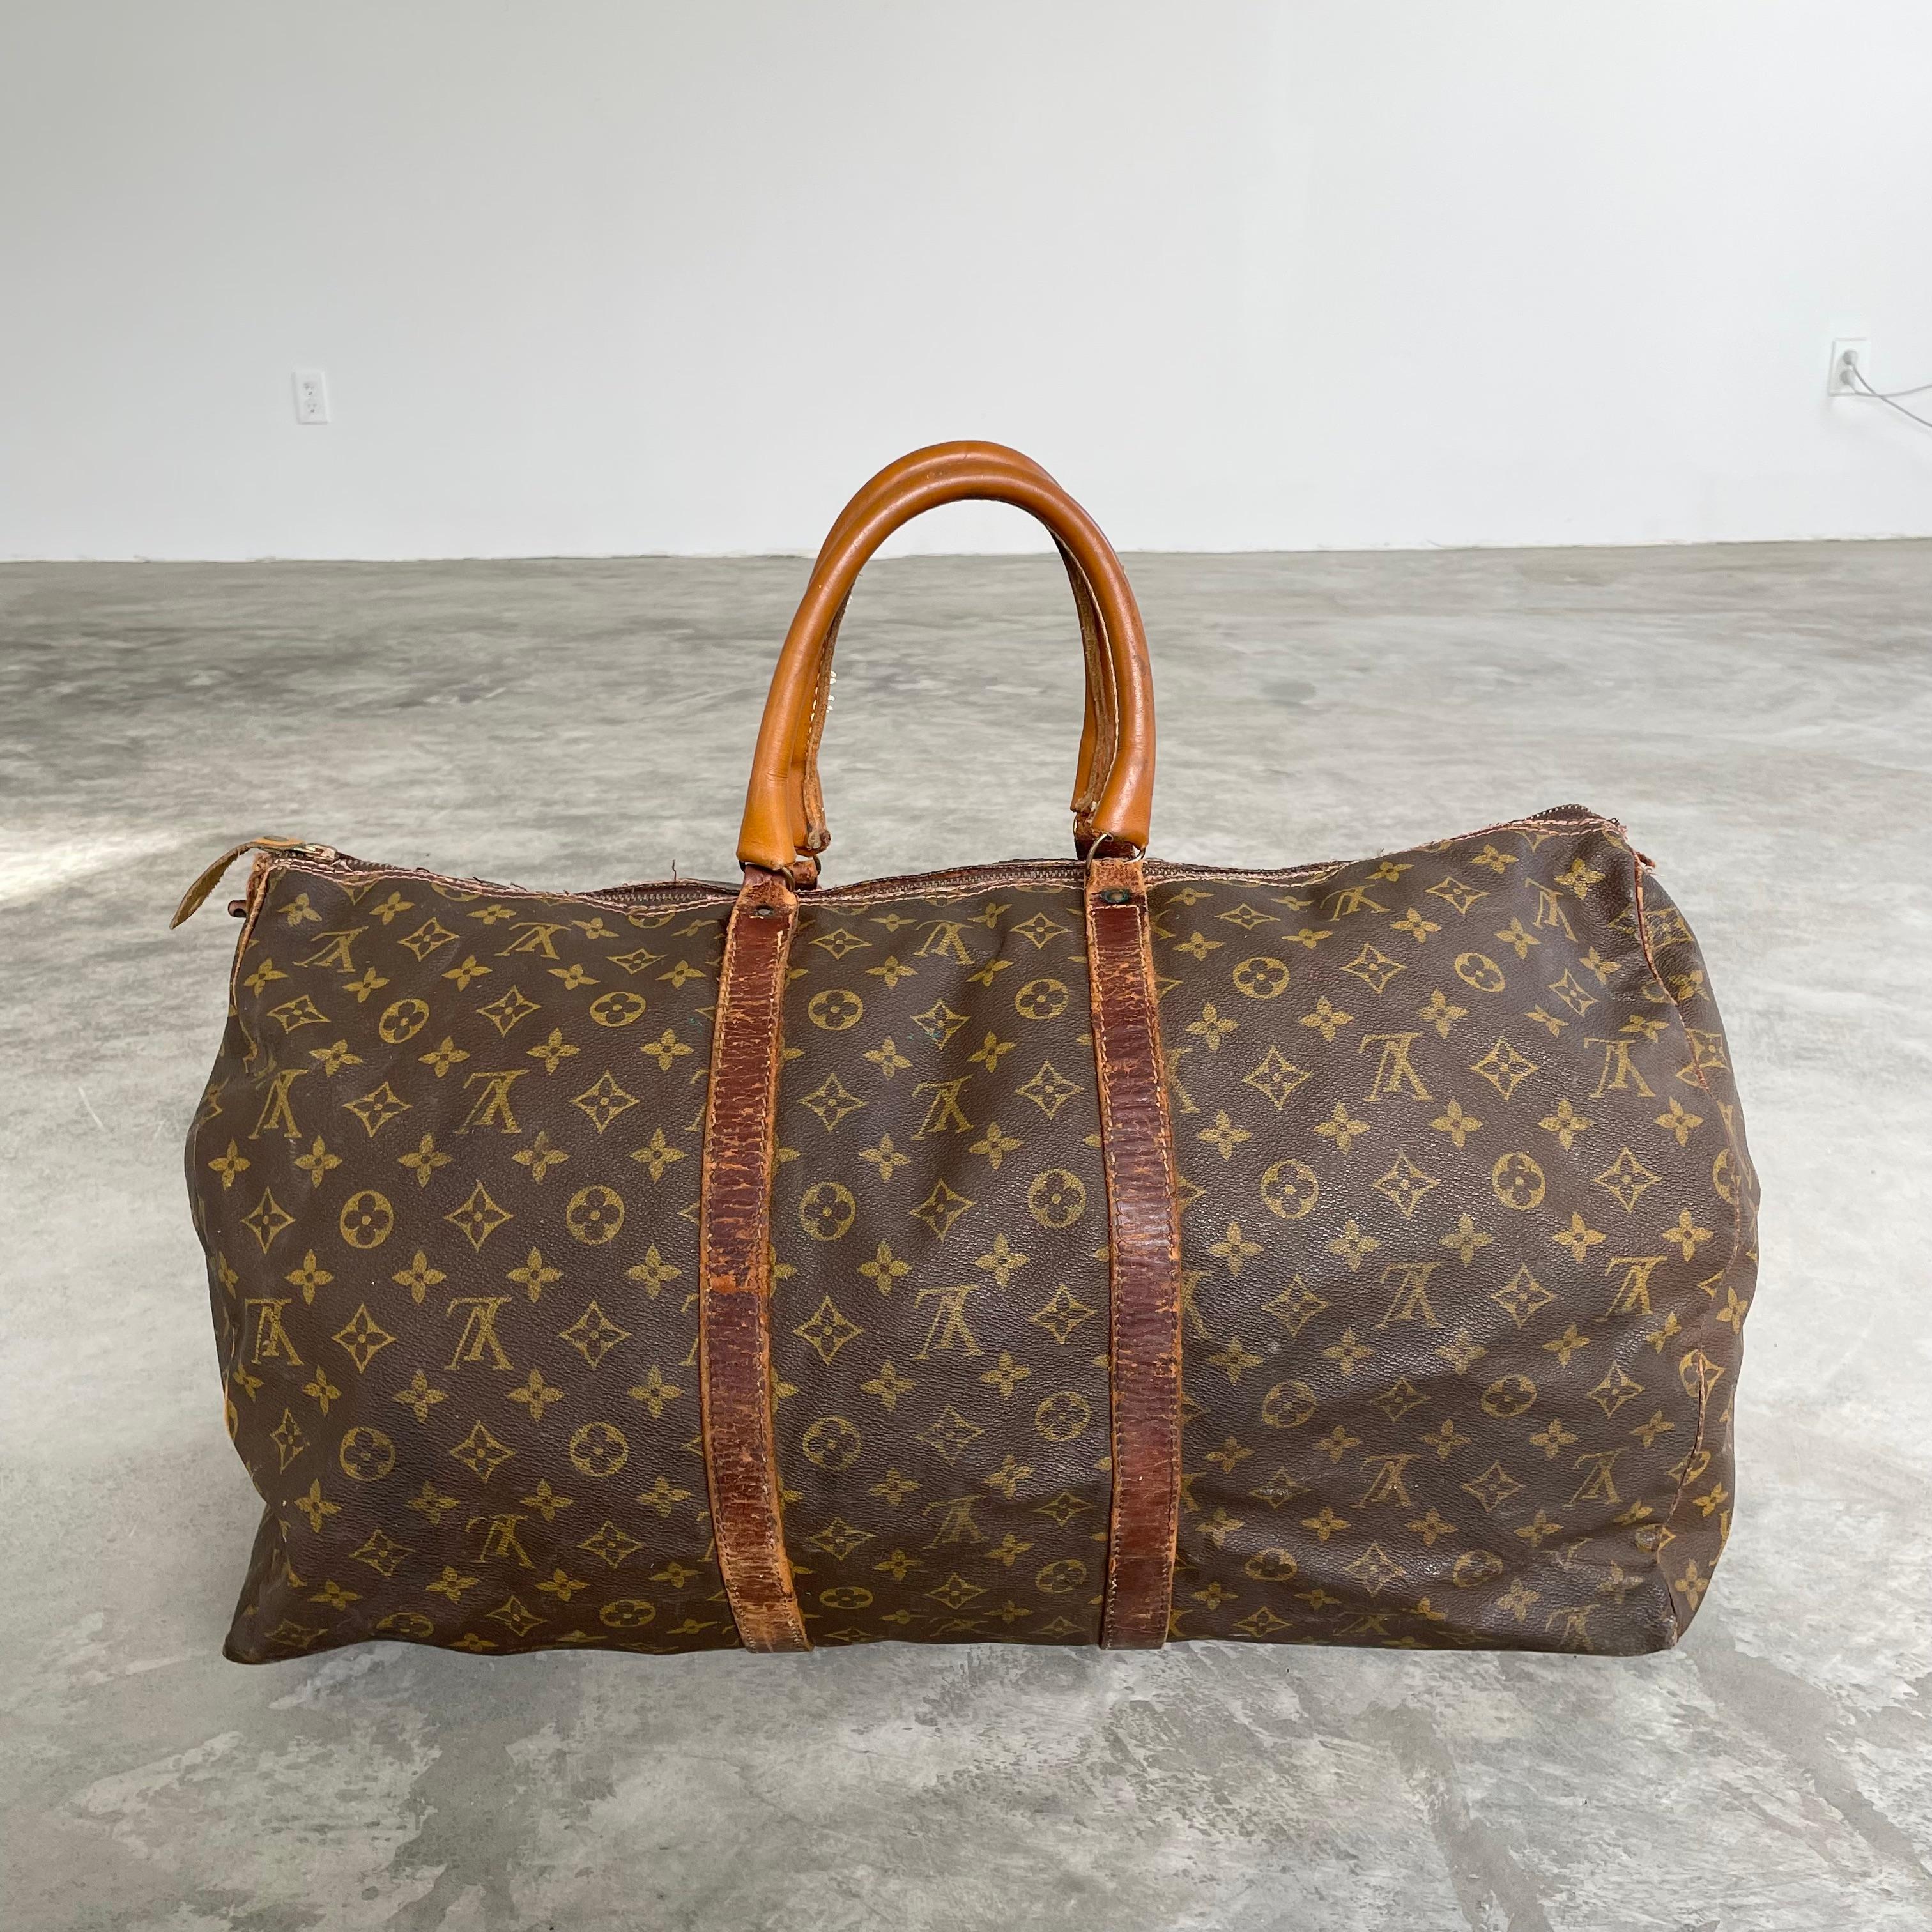 Classic vintage Louis Vuitton duffle bag. Perfect for weekend trips, this LV monogram print duffle is made with saddle leather and brass hardware and wrapped in the iconic Louis Vuitton canvas. Timeless simplicity in design and iconic badging have